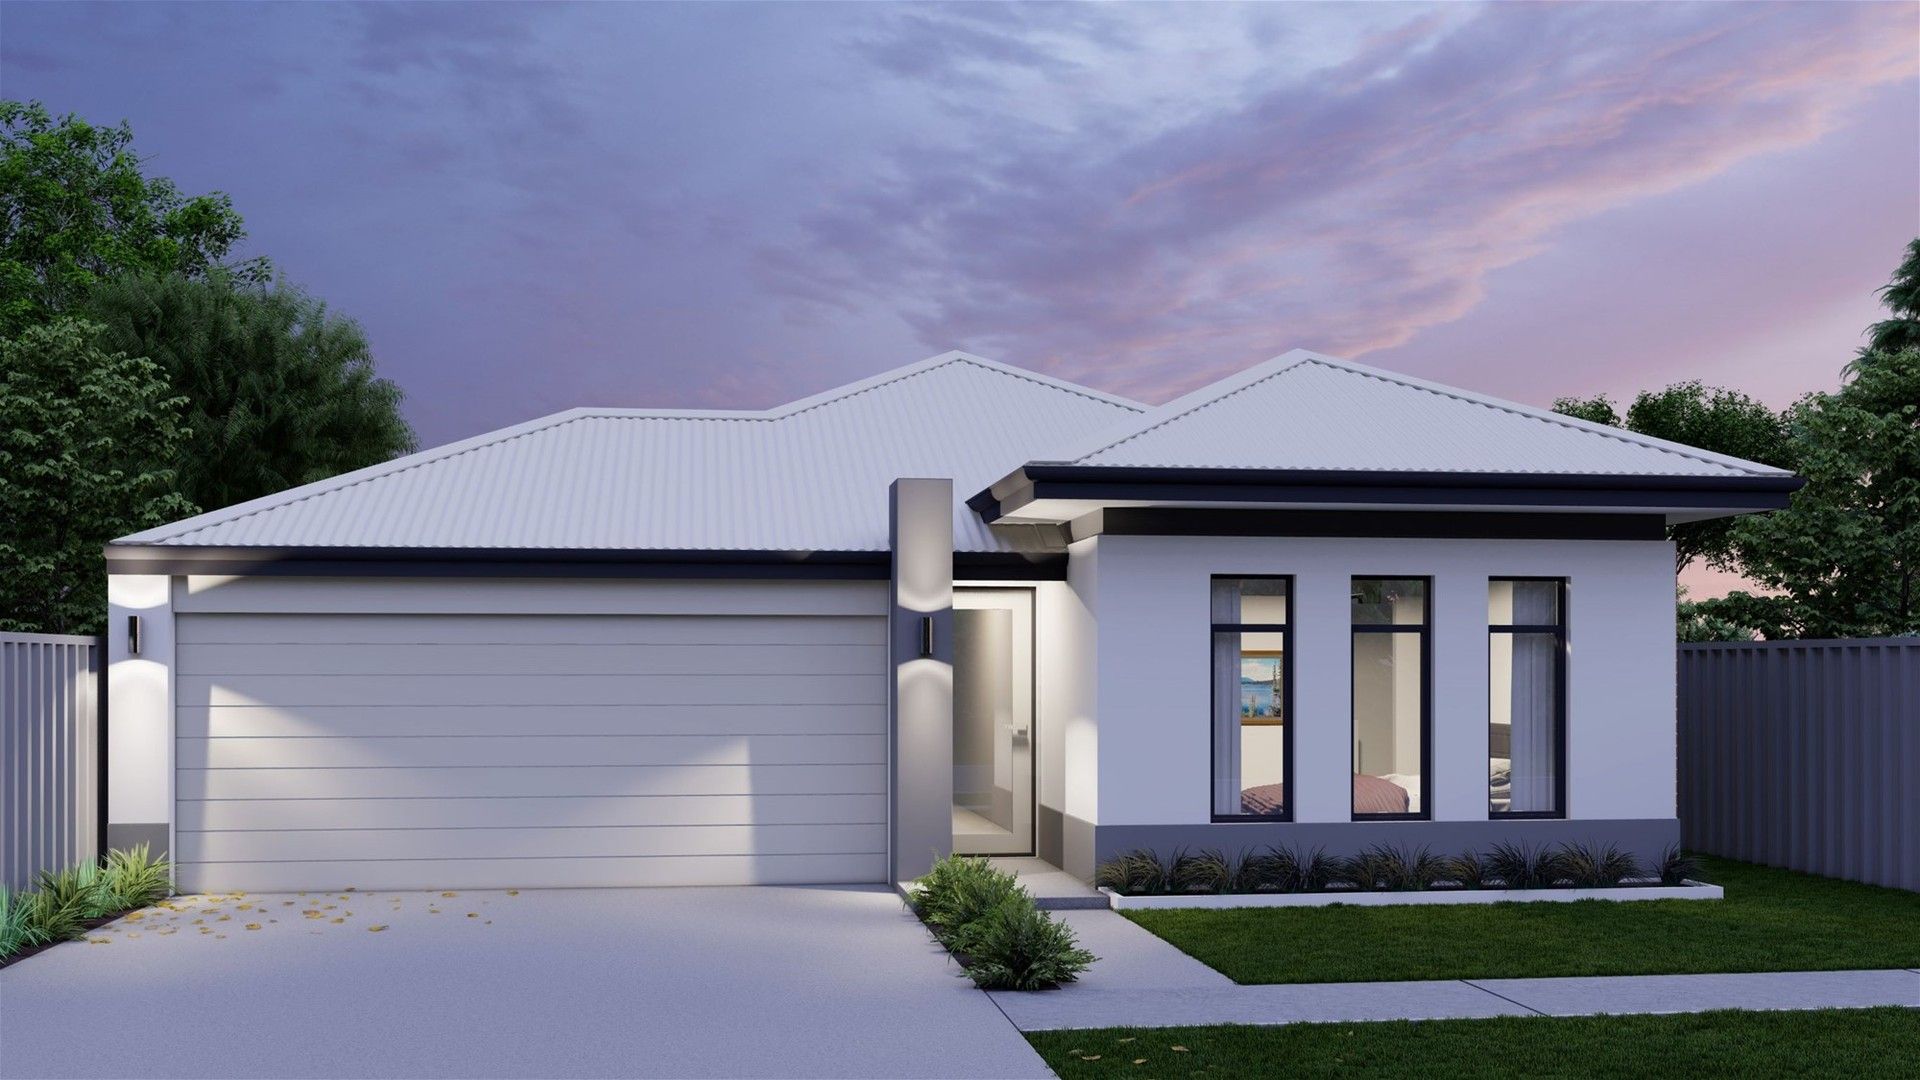 4 bedrooms New House & Land in Lot 815 Monza Avenue BRABHAM WA, 6055